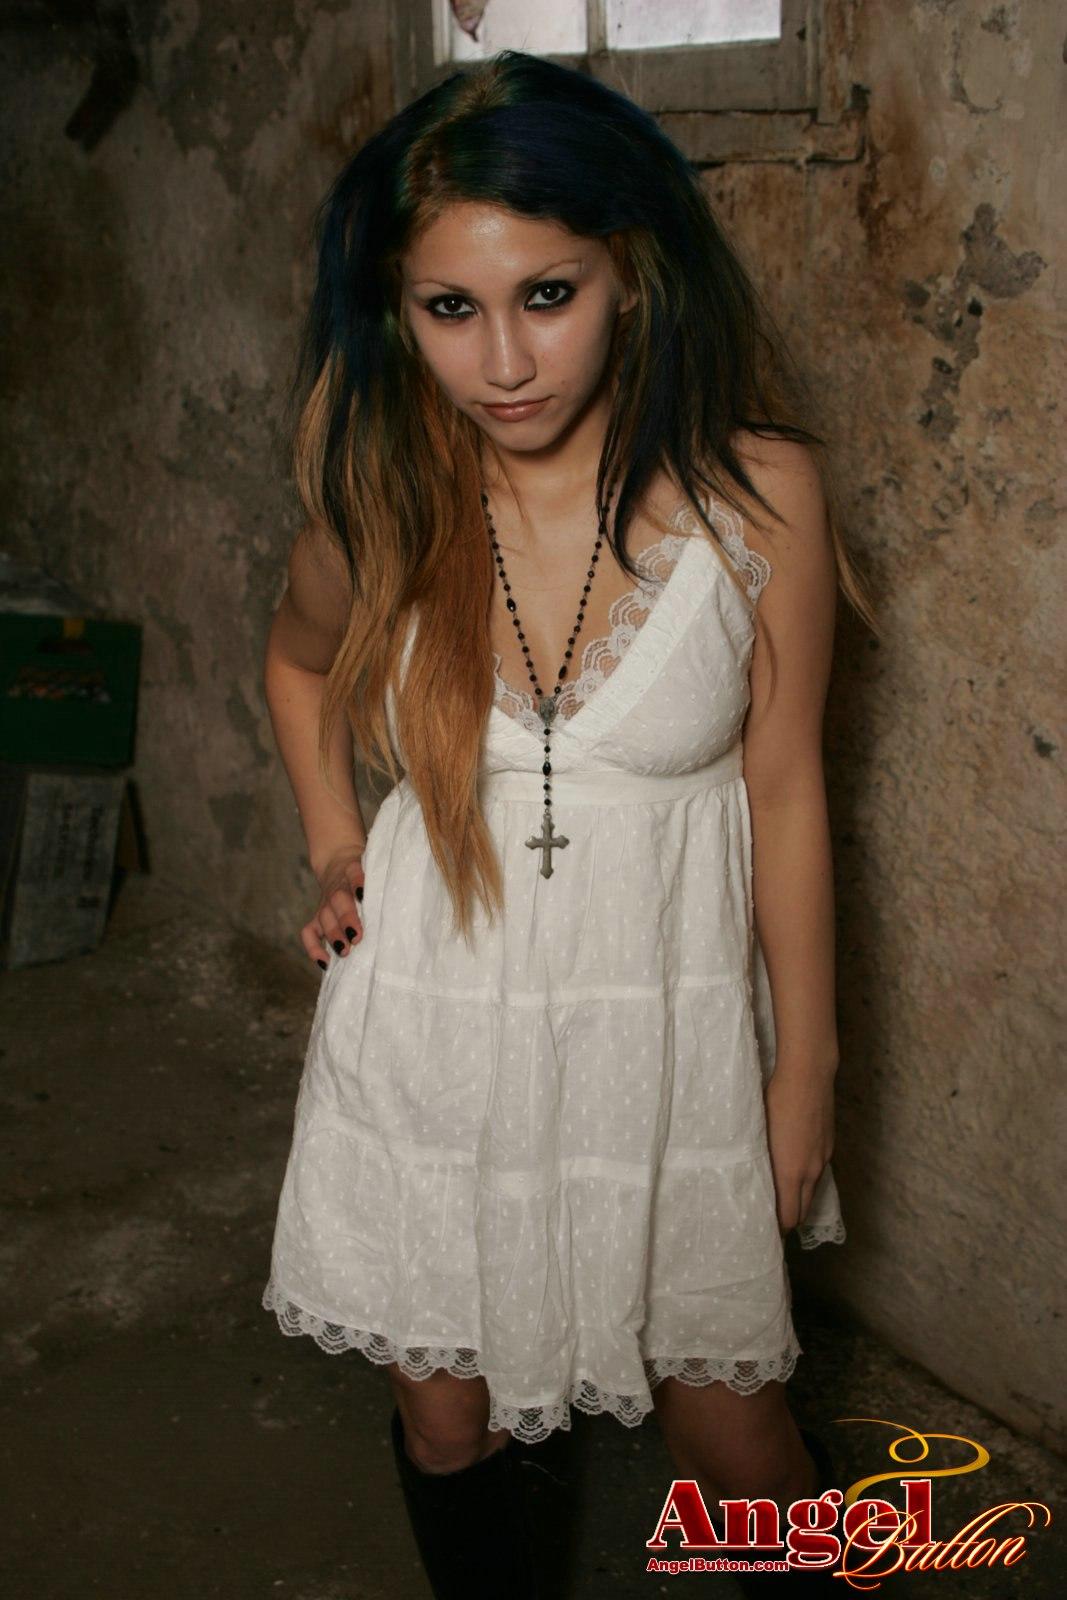 Pics of Angel Button in a white dress #53172297